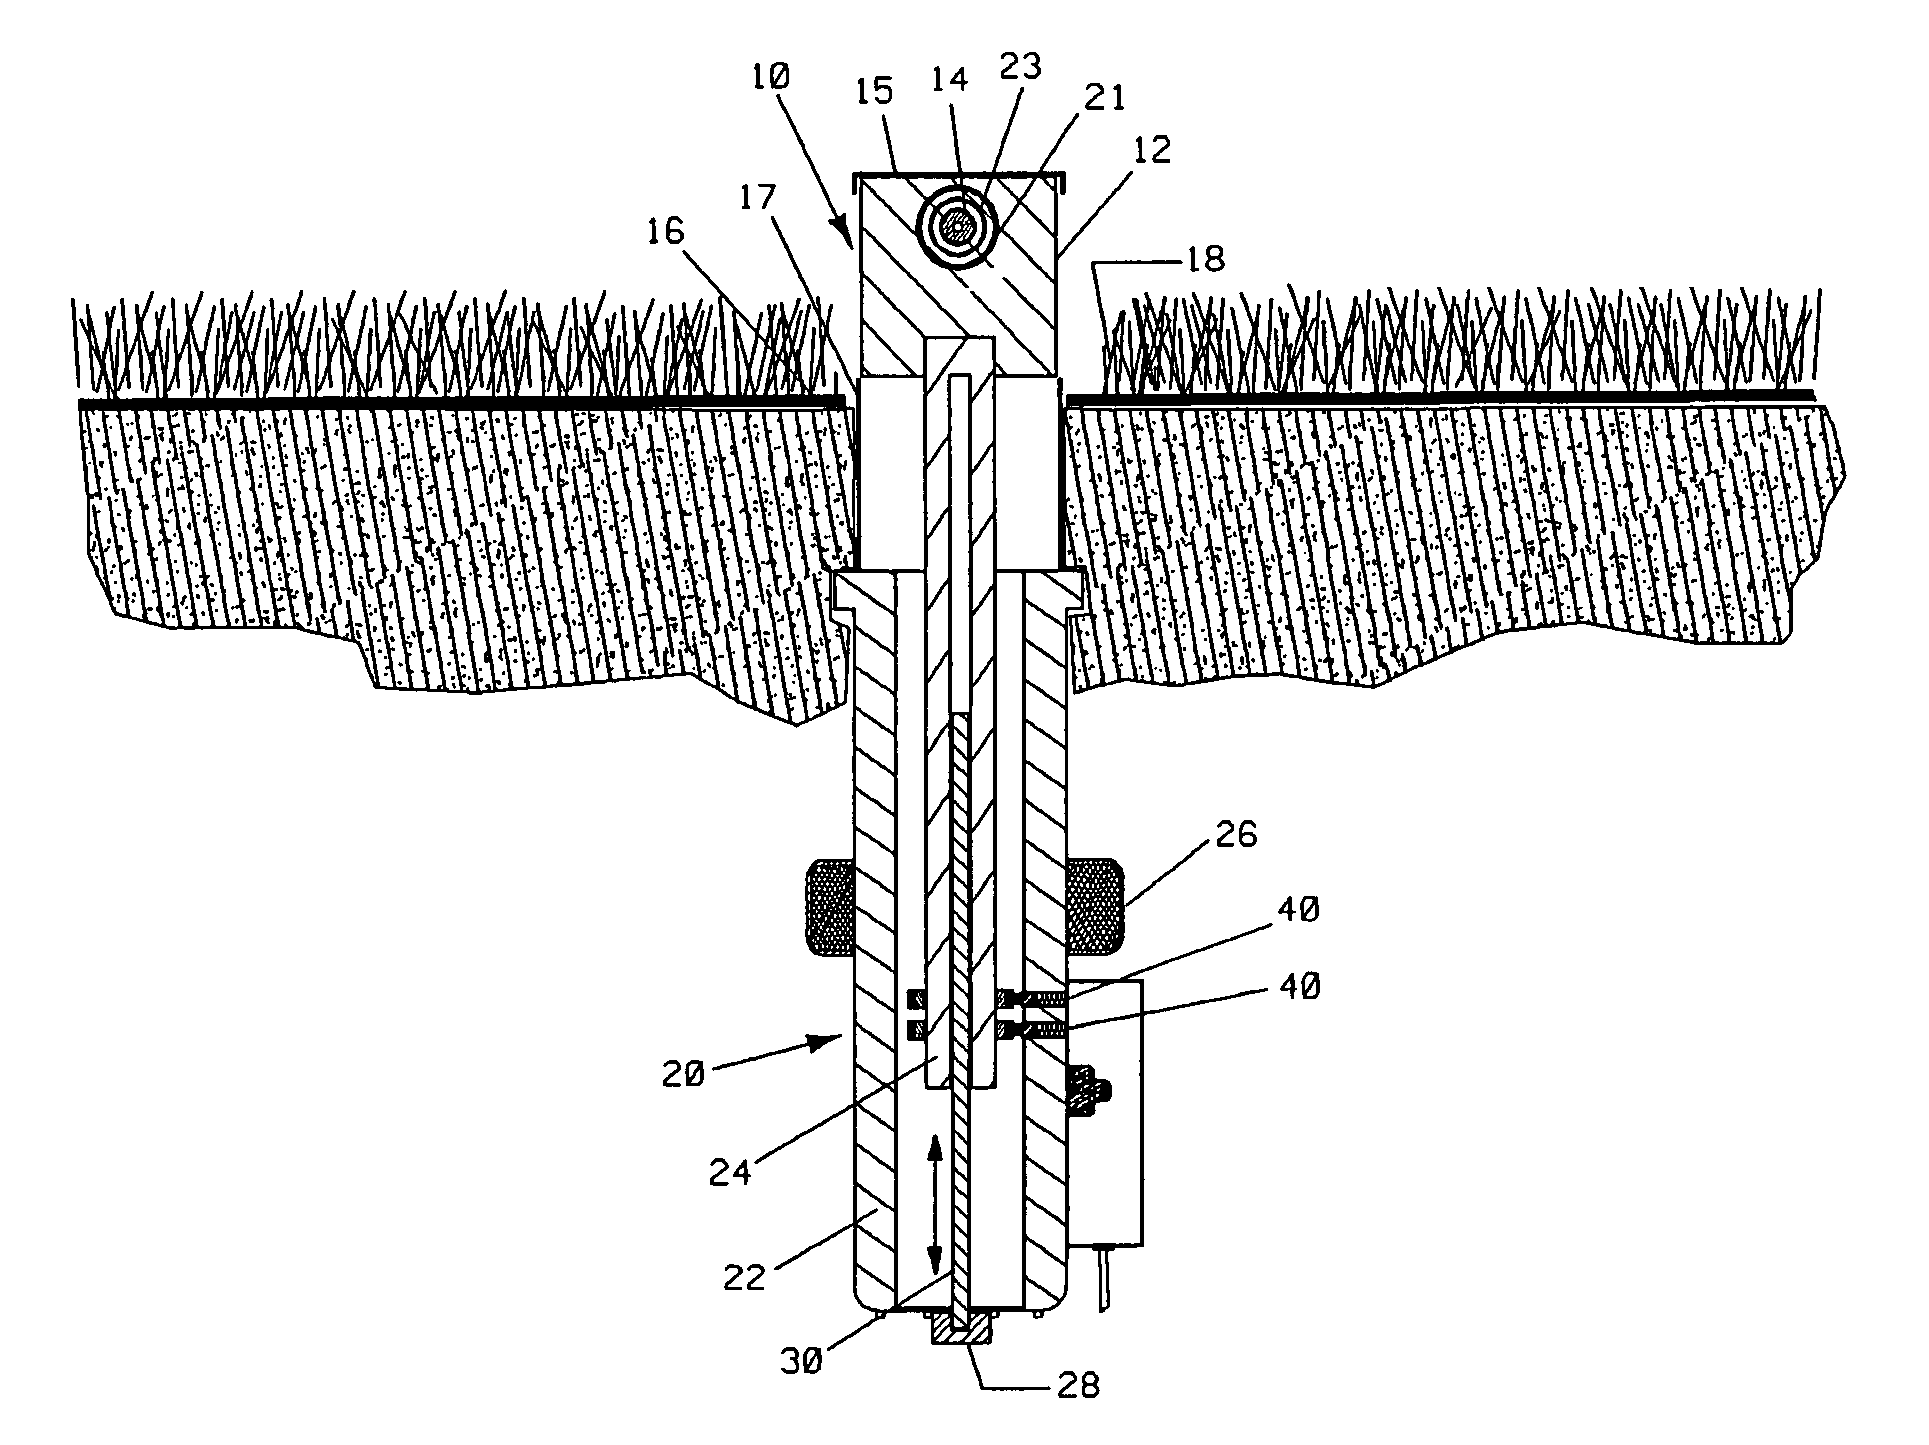 Apparatus and method for cutting lawns using lasers